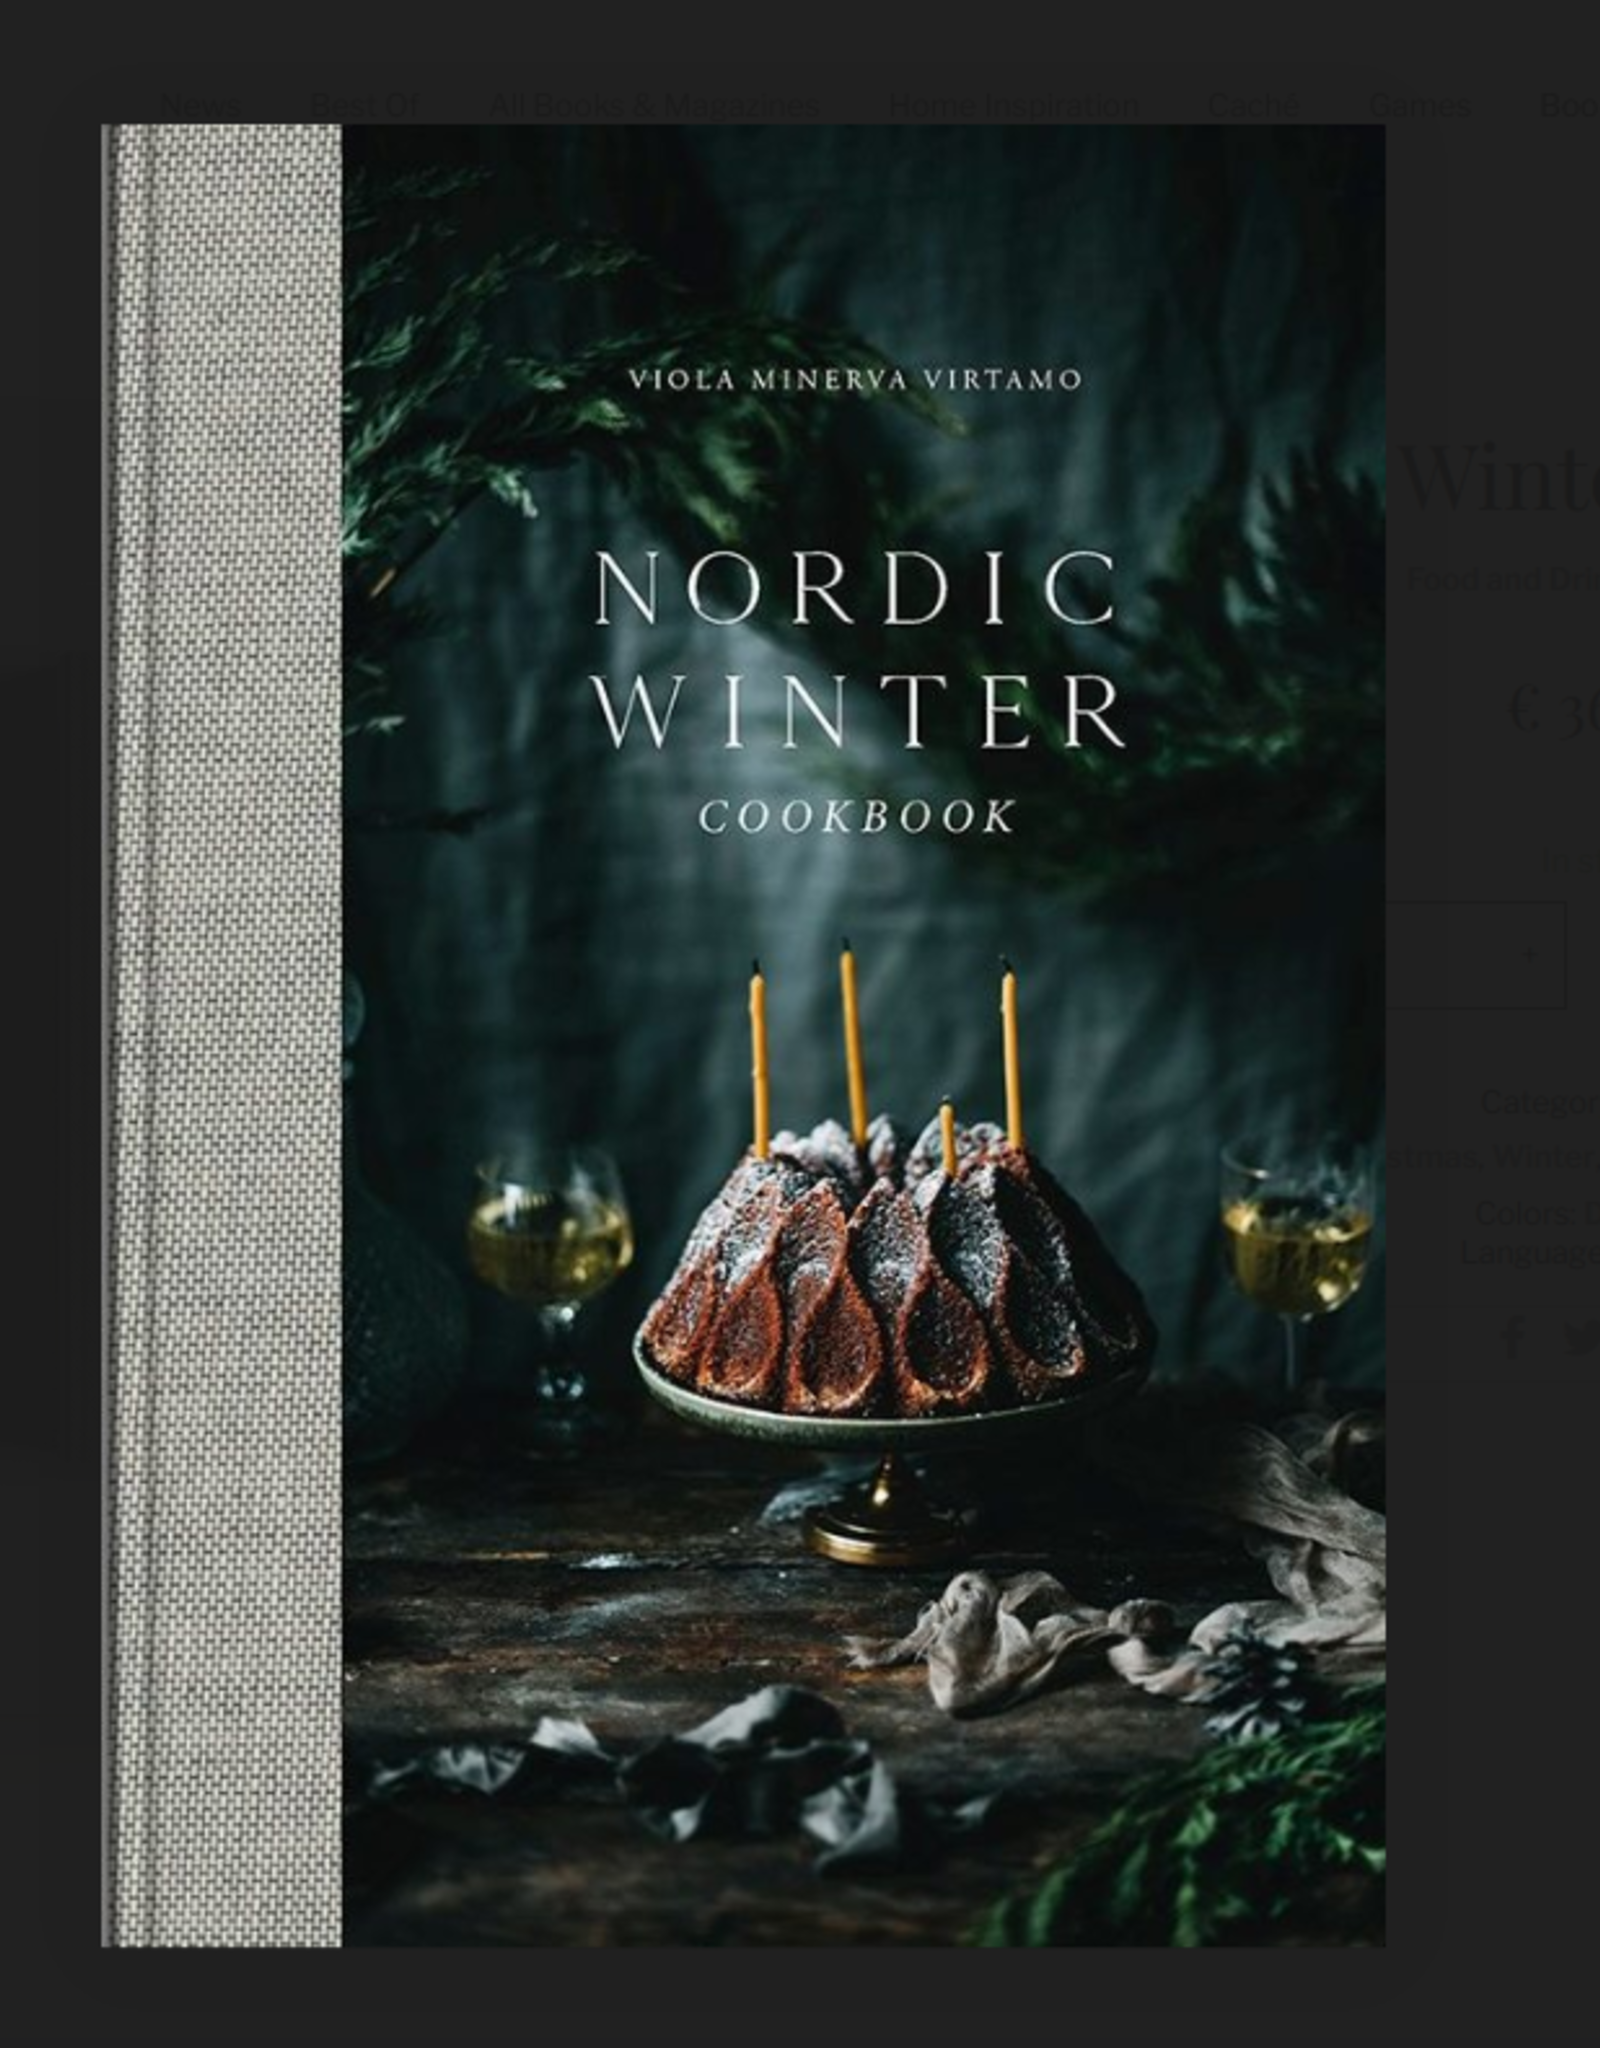 New Mags New Mags - Nordic winter cookbook